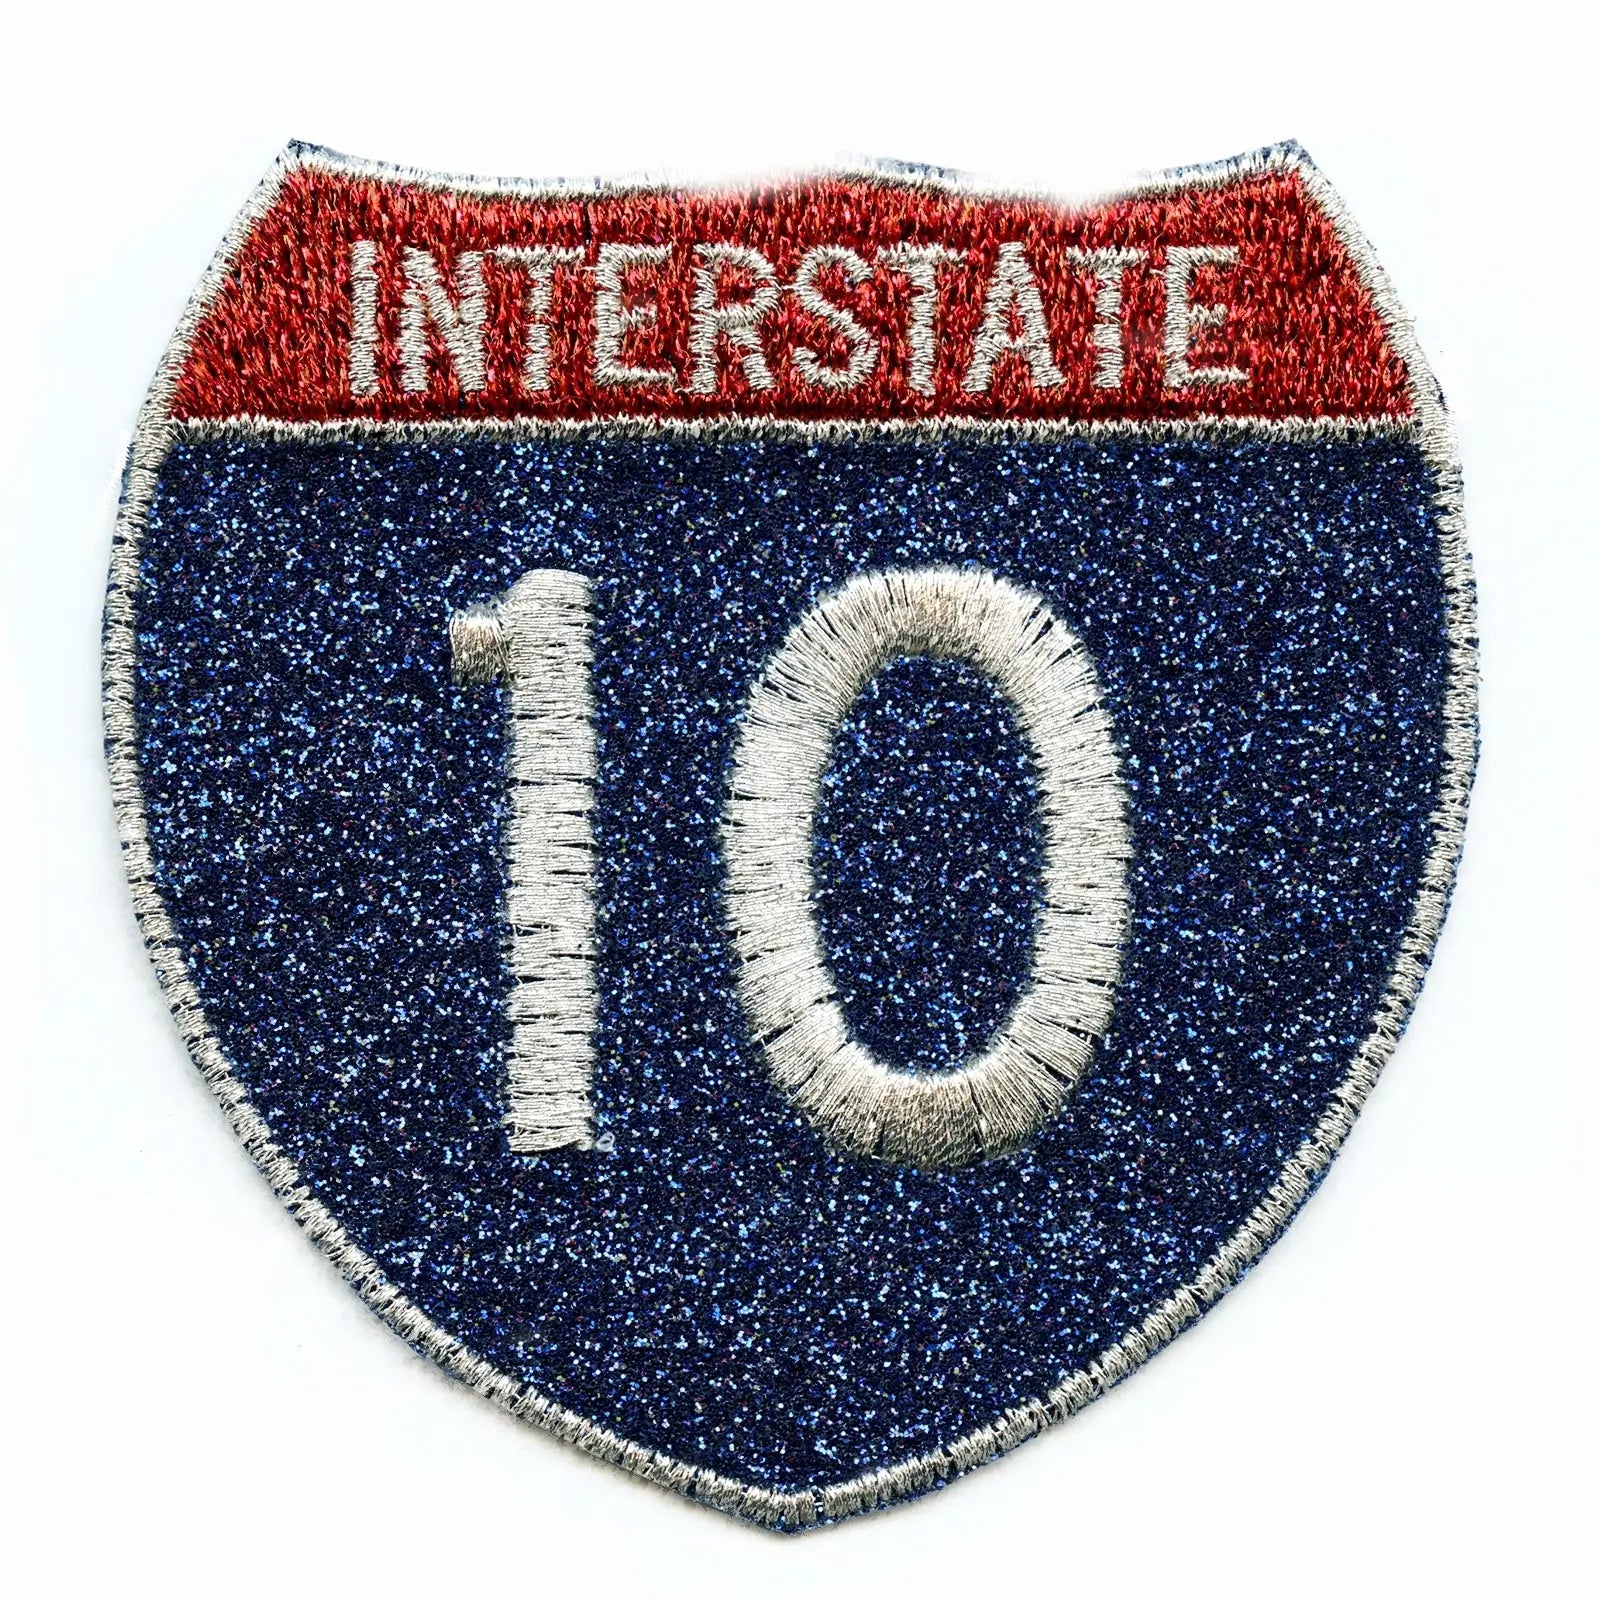 Houston Freeway Interstate 10 I-10 Sign Embroidered Iron on Glitter Sparkle Patch Bling 